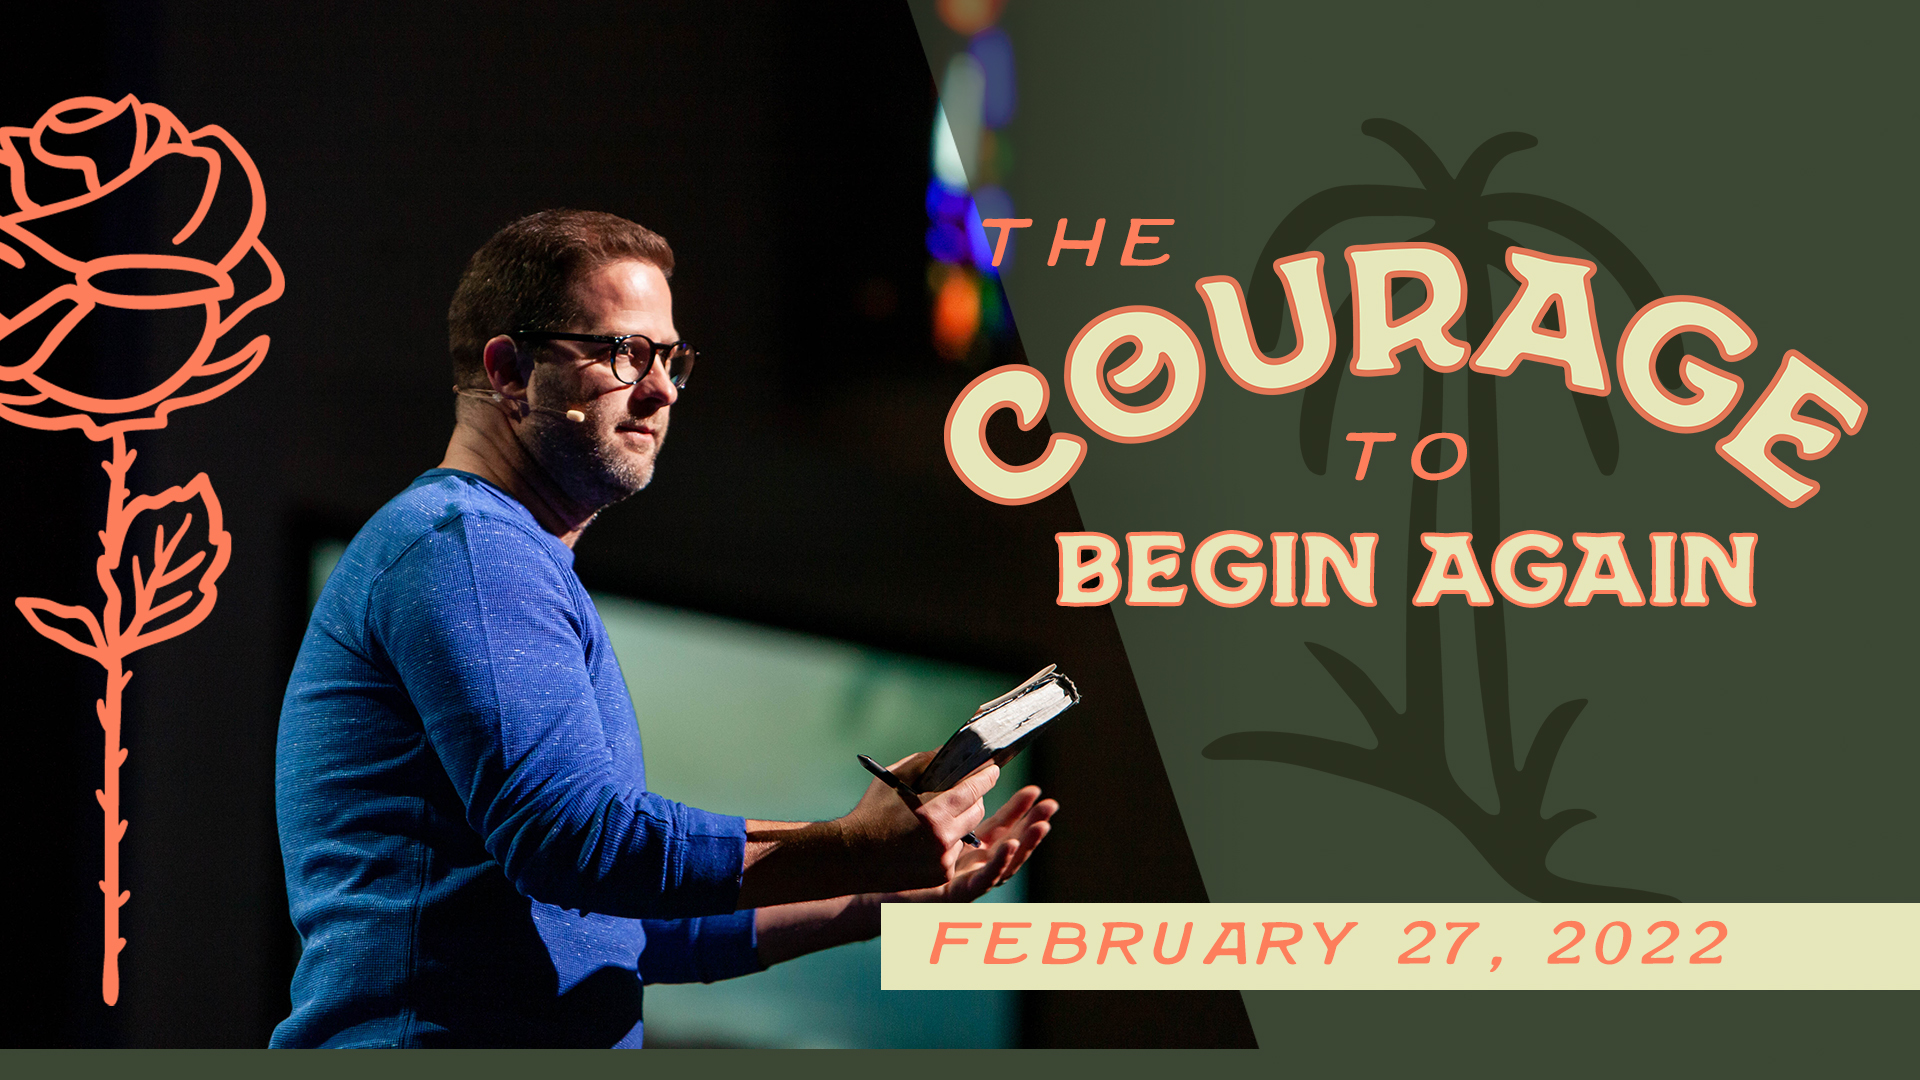 Courage to Begin Again Image